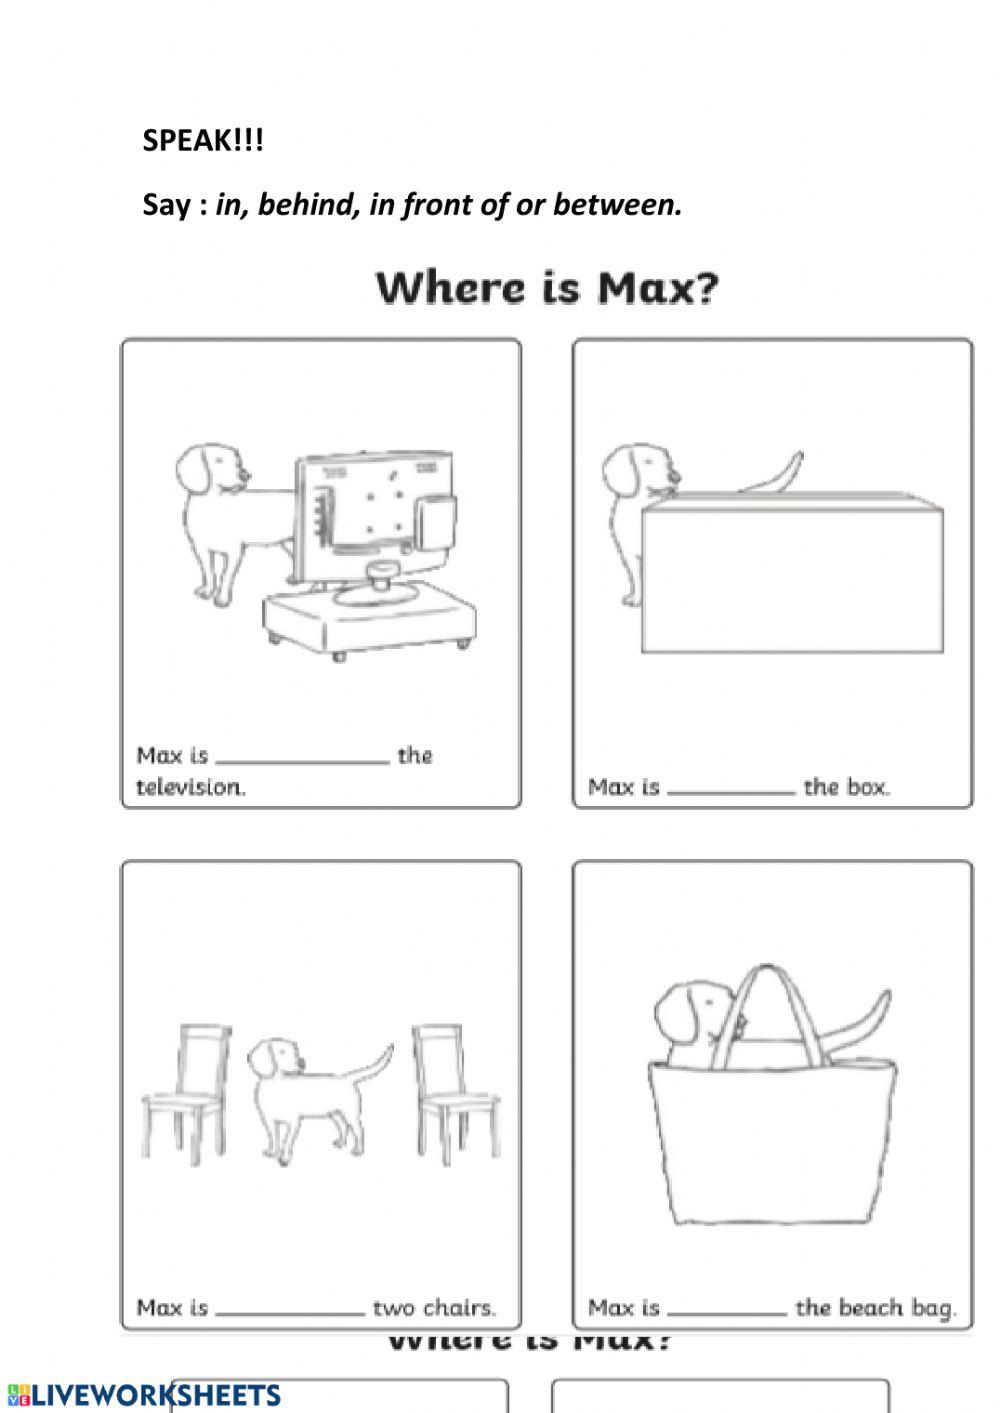 Where is max?